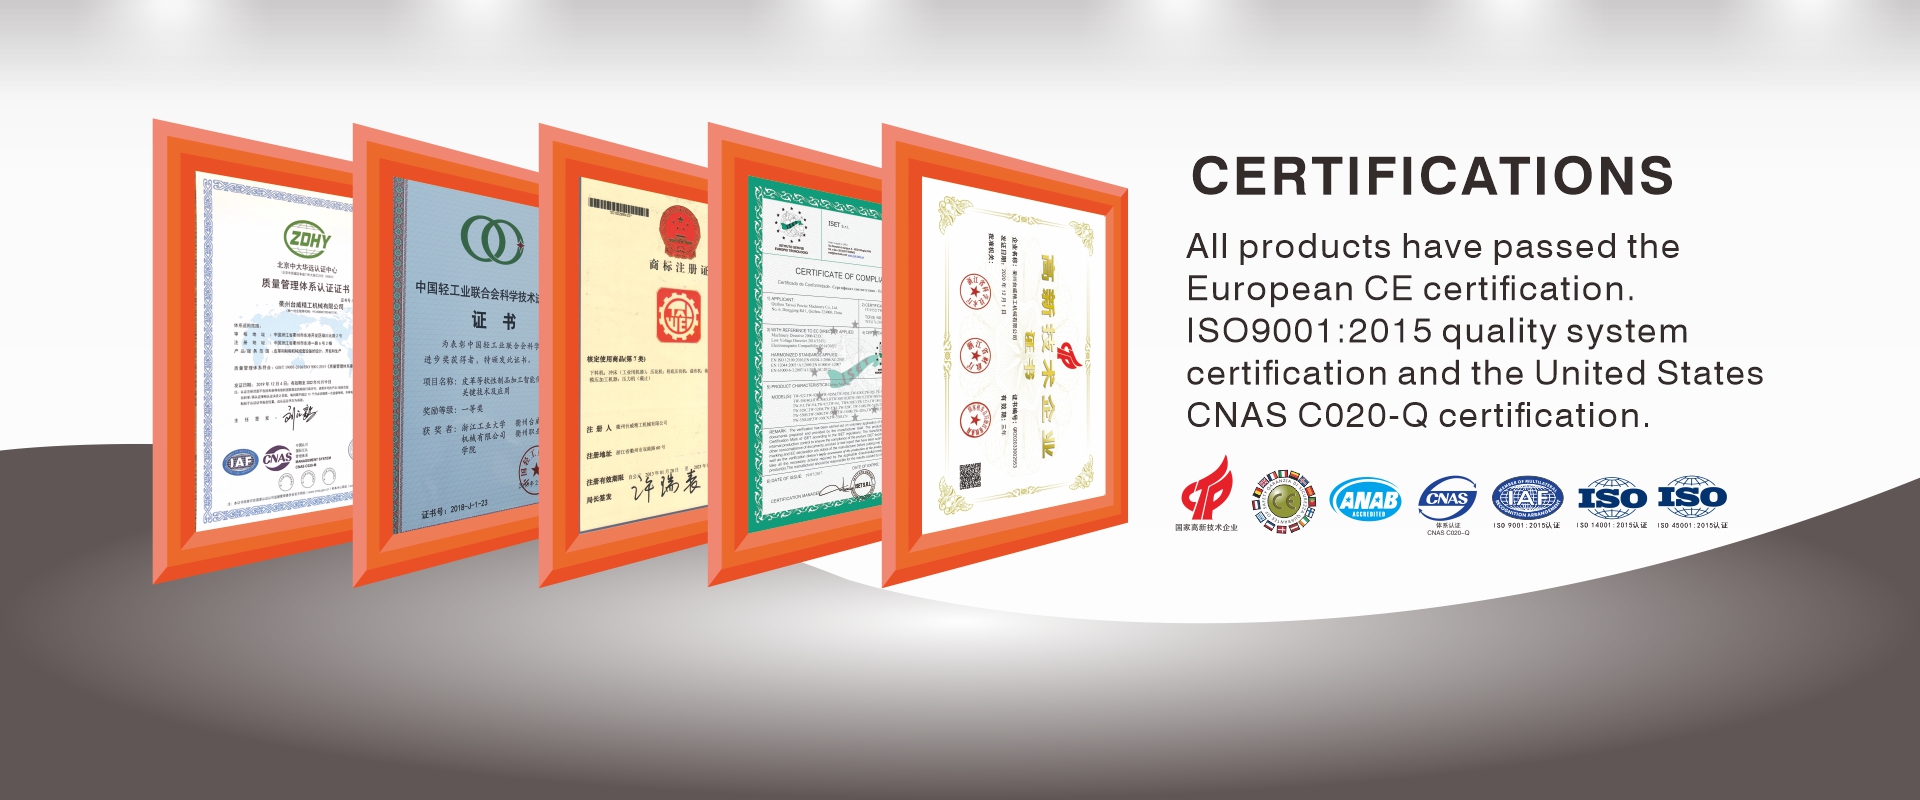 The series of products involved by the company have passed the European CE certification, ISO9001:2015 and CNAS C020-Q quality system certification in the United States. By the end of 2019, it has completed 1 main drafting of national standards, 4 main drafting of industrial standards, 2 standards of “Made In Zhejiang” brand, participated in the 2 national standards & 17 industrial standards, 2 computer software copyrights. It has obtained 7 invention patents, 30 utility model patents, and 4 appearance patents. 